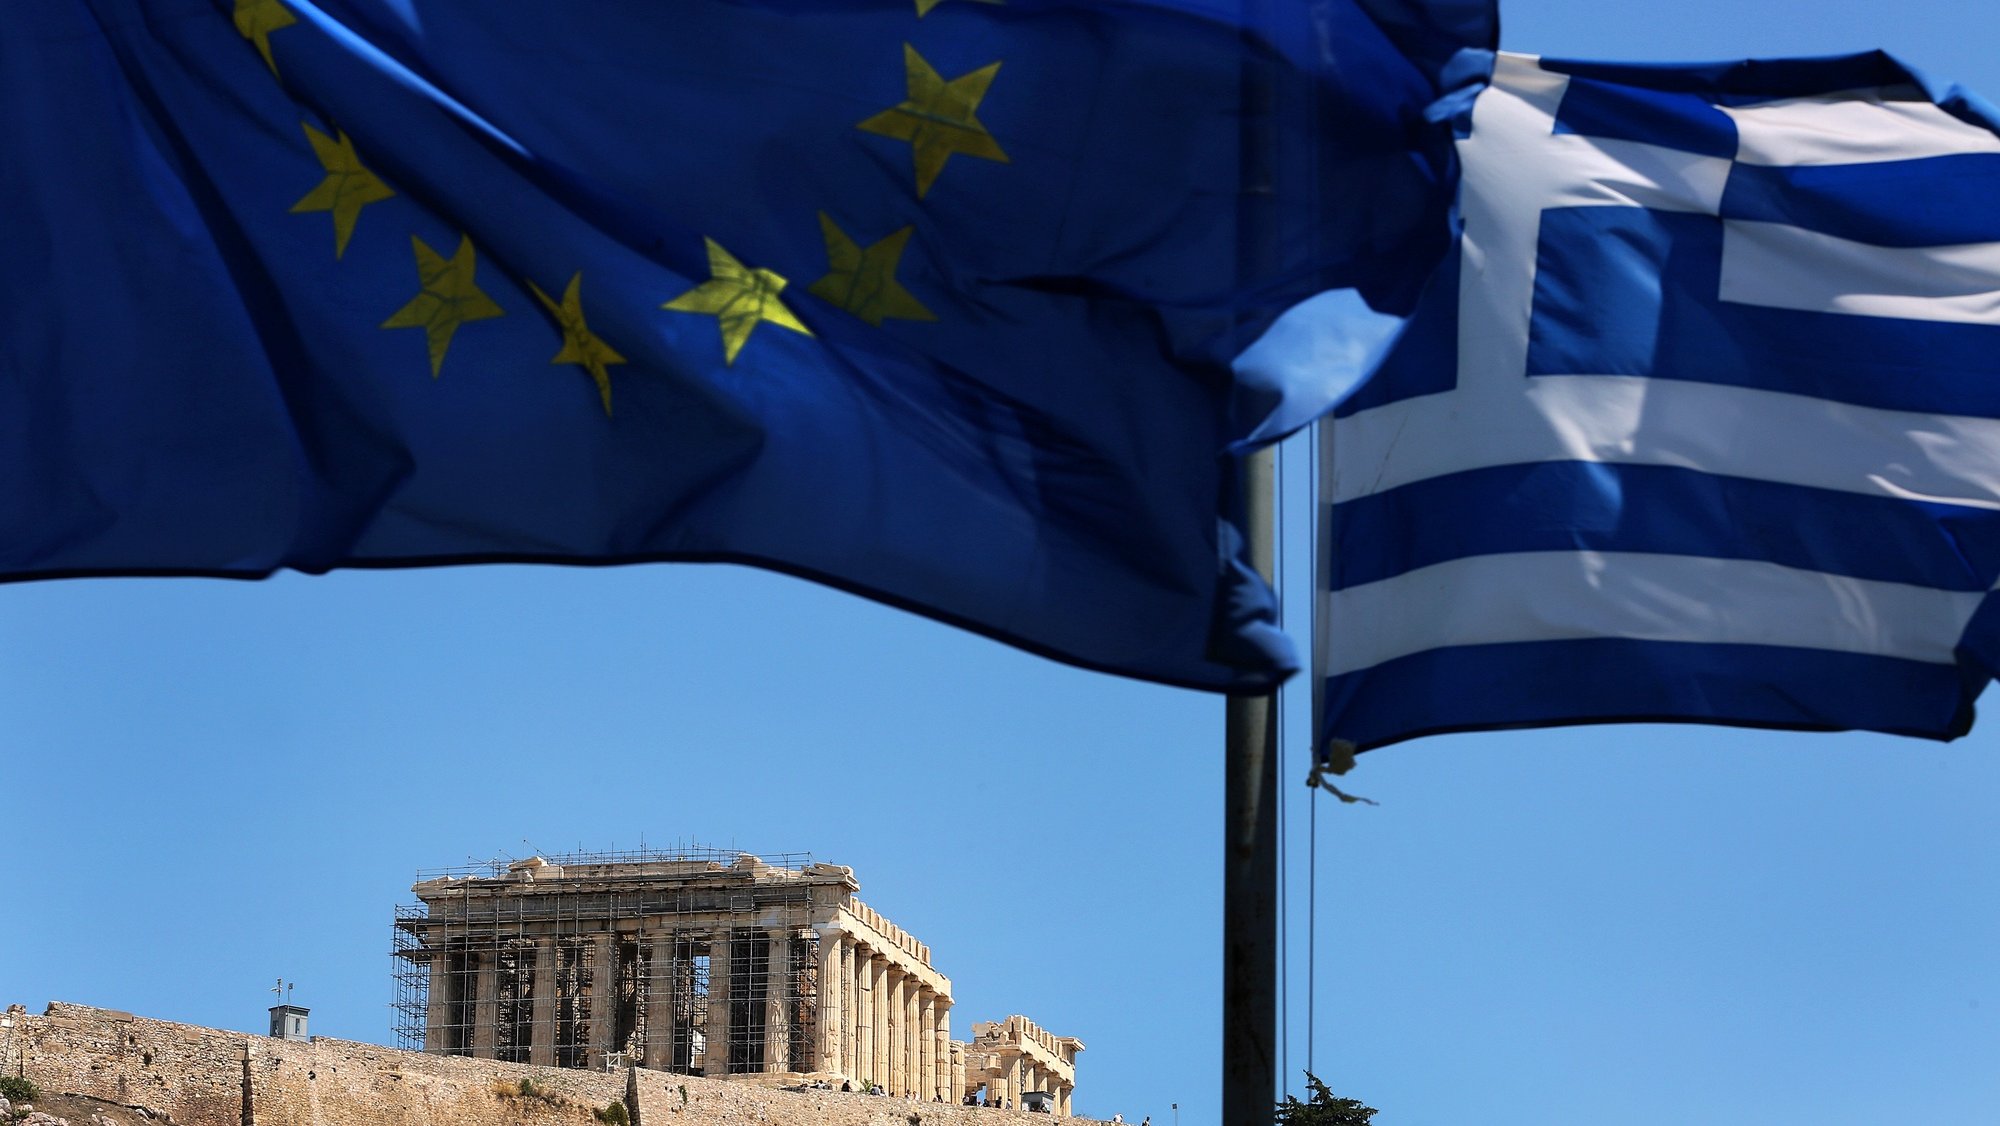 epa06960380 The Greek flag (R) and the flag of EU wave over the Parthenon on Acropolis Hill in central Athens, Greece, 20 August 2018. Greece concludes the adjustment program on August 20. Greece has successfully concluded a three year European Stability Mechanism (ESM) stability support programme, EU Commissioner Moscovici said.  EPA/SIMELA PANTZARTZI